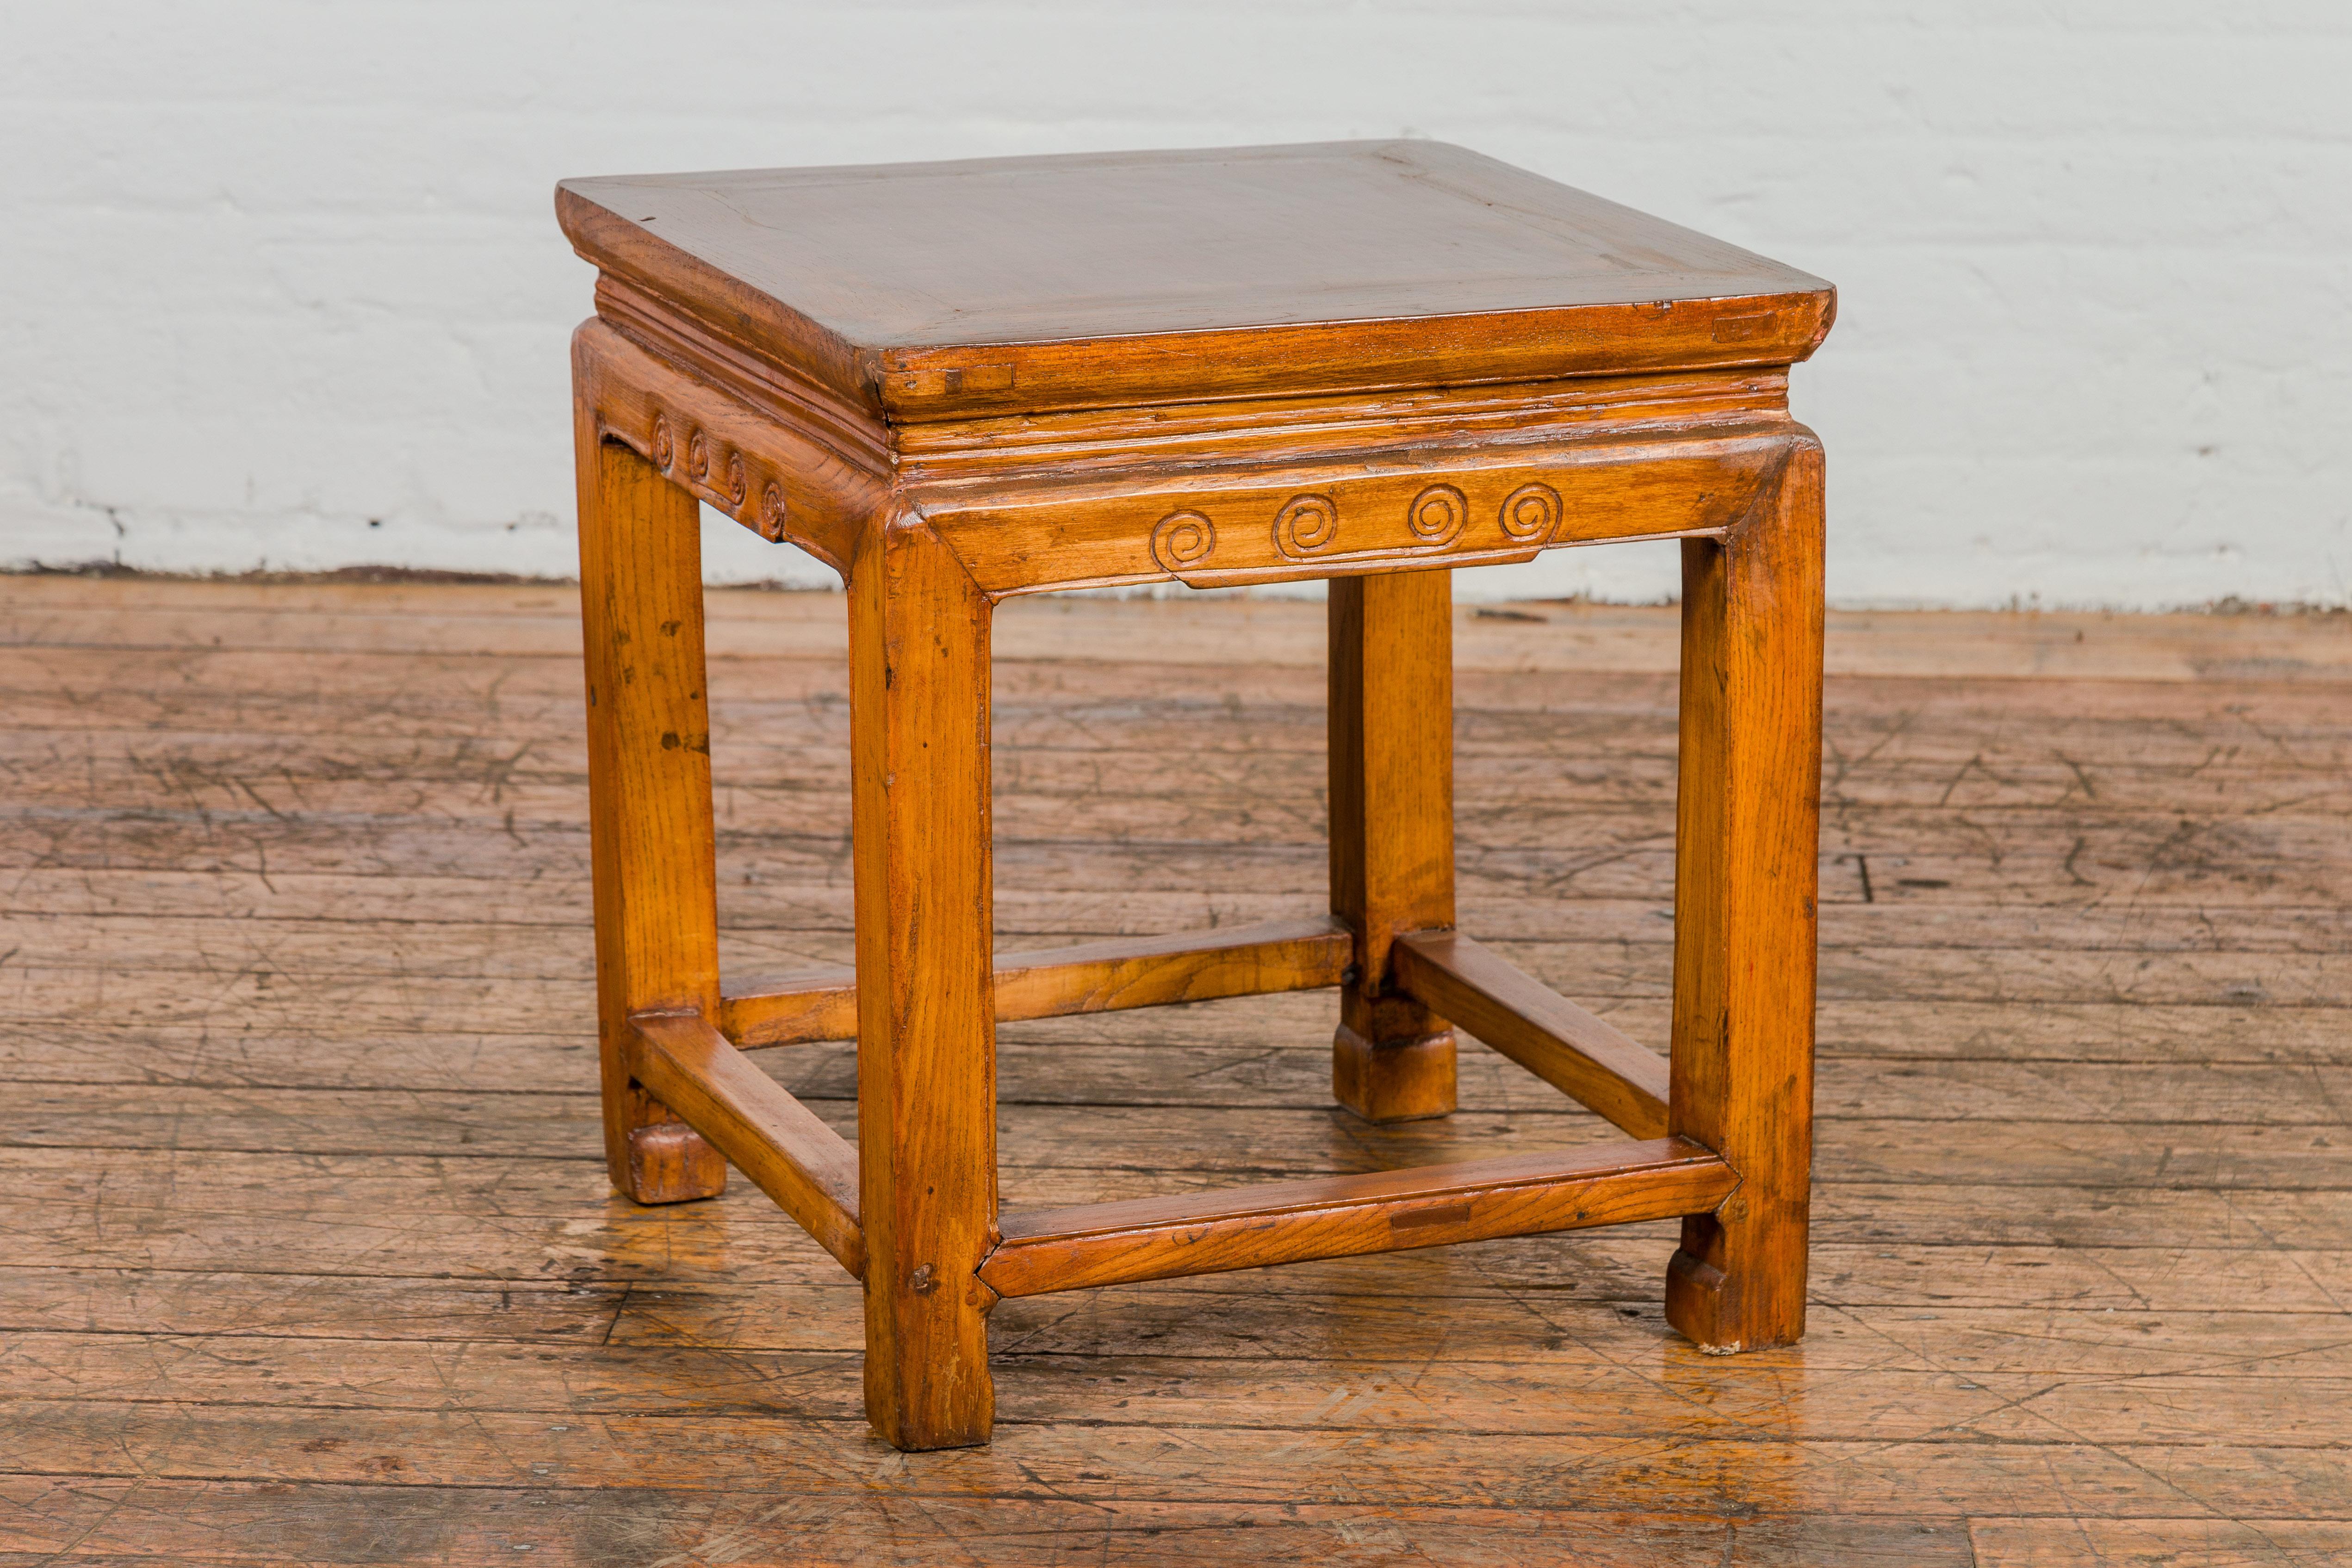 Enrich your home with the timeless elegance of this Chinese late Qing Dynasty elm side table, featuring horse hoof legs, side stretchers, and a carved apron.

The table's rectangular top, crafted from solid elmwood, exudes a sense of warmth and